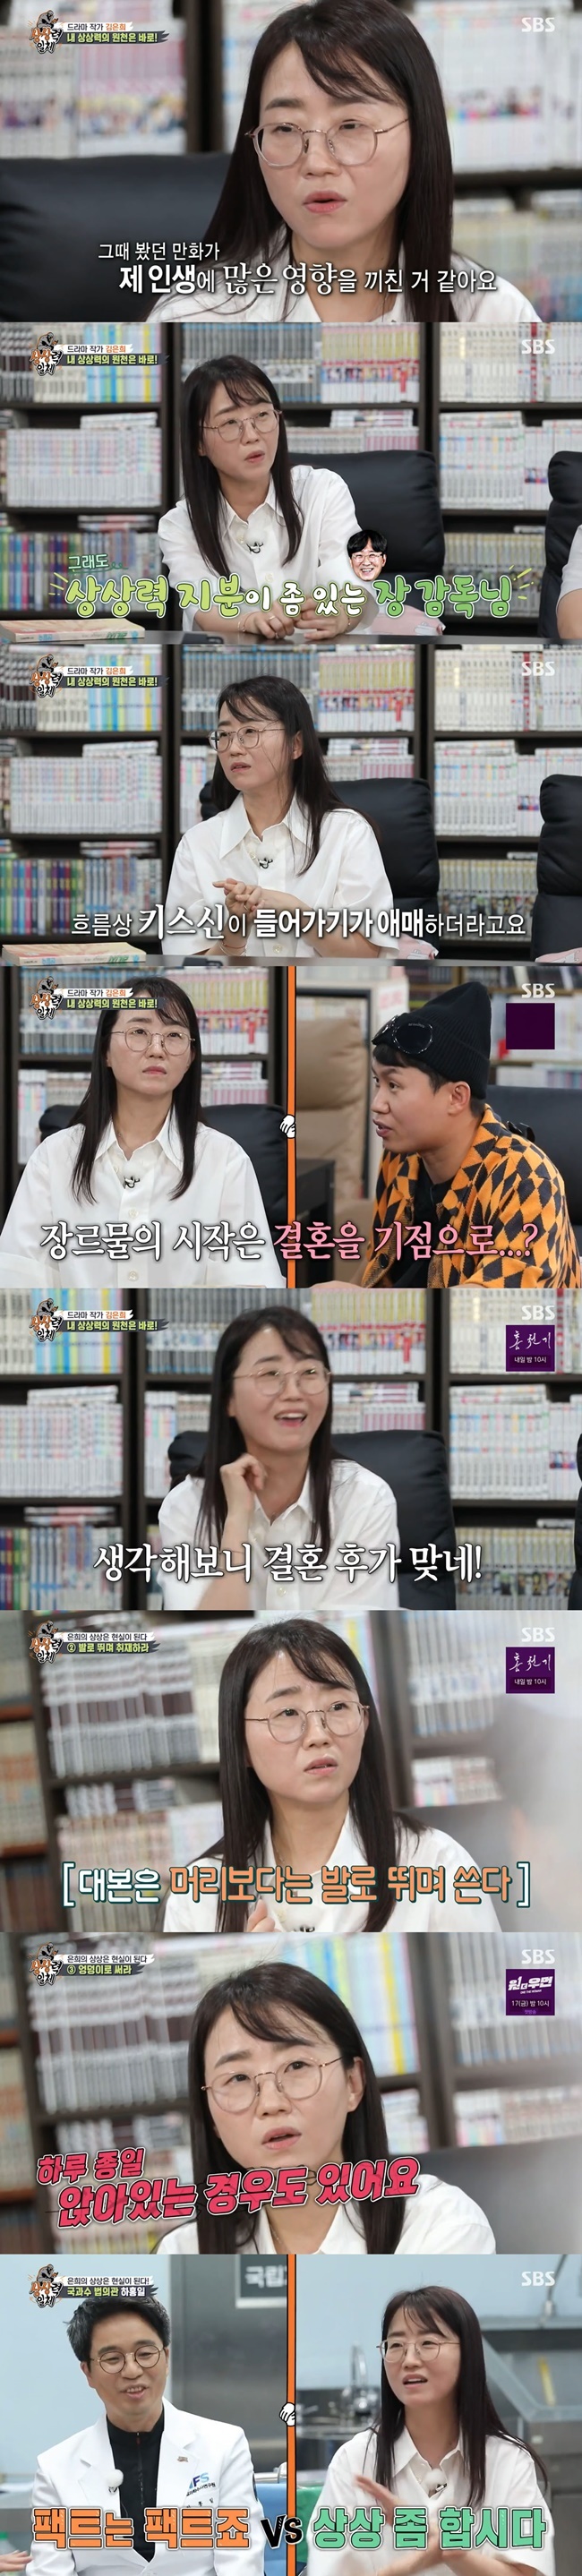 Kim Eun-hee author reveals the secret to writing with the Mount Fuji of imagination.In SBS All The Butlers broadcast on September 5, Kim Eun-hee, the master of Korean genre, flew to the daily master.Actor Seak-Ho Jeon appeared as a daily student on the day, and Seak-Ho Jeon said of the masters hint, If you make a appearance, you will all bow your head at 90 degrees.He embodies many imaginations. When I see his work, I think, Really? Is this going? Then, when Seok-Ho Jeon called Chairman Kim, Kim Eun-hee appeared and surprised his disciples.Yoo Soo-bin was the first to jump out and say, Actor Yoo-bin.Kim Eun-hee writes about his next film, Im preparing for the drama Jirisan; then Seek-Ho Jeon reveals confidence that Im coming out.Kim Eun-hee said of Seak-Ho Jeon, Im a really close drinker, Im so good at reaction that I talk a lot about my work.I thank him.Kim Eun-hee said, When I was a child, I did not eat rice and I was looking at comic books and I fell forward. The imaginative Mount Fuji started in a comic book room as a child.Also, Kim Eun-hee asked why there is no Kiss god in the work, Kiss god is ambiguous to enter.I have to go there, but I want to write it, but I can not write it well. So Yang asked, Mello, did you like genuine comic books and started writing about killing after marriage? Kim Eun-hee wrote, I think it is because Im talking.So its marriage after. Where do you kiss me, no! and laughed.In addition, Kim Eun-hee mentioned the process of writing works.Kim Eun-hee said, It is to bring a little bit of articles or books that I had an interest and make them into a story. Kingdom liked history and zombies.Also, I have to use my feet rather than my head. If I only imagine and know, I will only come out like a lady in her 50s.I have to meet a lot of generations of experts and listen to the story so I can write a little more realistic. In addition, author Kim Eun-hee said, I have to write with my feet and ass. I sometimes sit all day.When I saw the number of steps on my cell phone, I walked 78 steps for 24 hours.  For example, when I write Kingdom, I fix it 100 times even if I use it once.I see the whole thing again even if I have to fix it a little bit. Among them, Kim Eun-hee suggested to his disciples to adapt fairy tales as genres.Kim Eun-hee has put up his personal notebook, which he has used since 2016, including the unreleased work Jirisan to Kingdom series.In order to help his disciples, Ha Hong-il, a forensic researcher at the National Institute of Scientific Investigation, who was in charge of consulting the drama Sign, appeared.